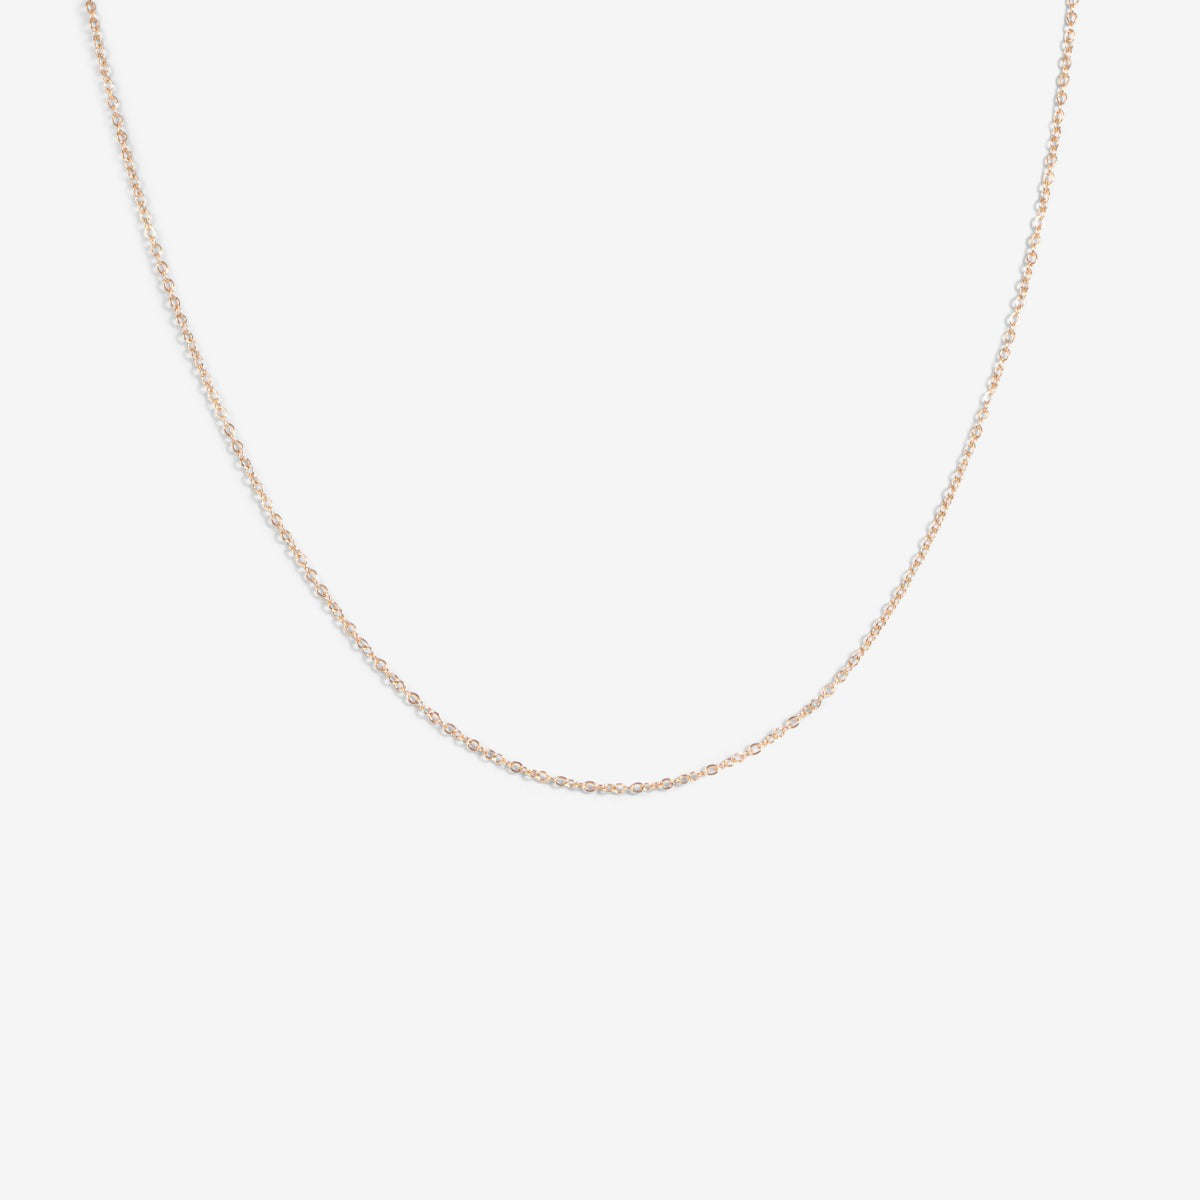 Thin golden stainless steel chain (18’’)